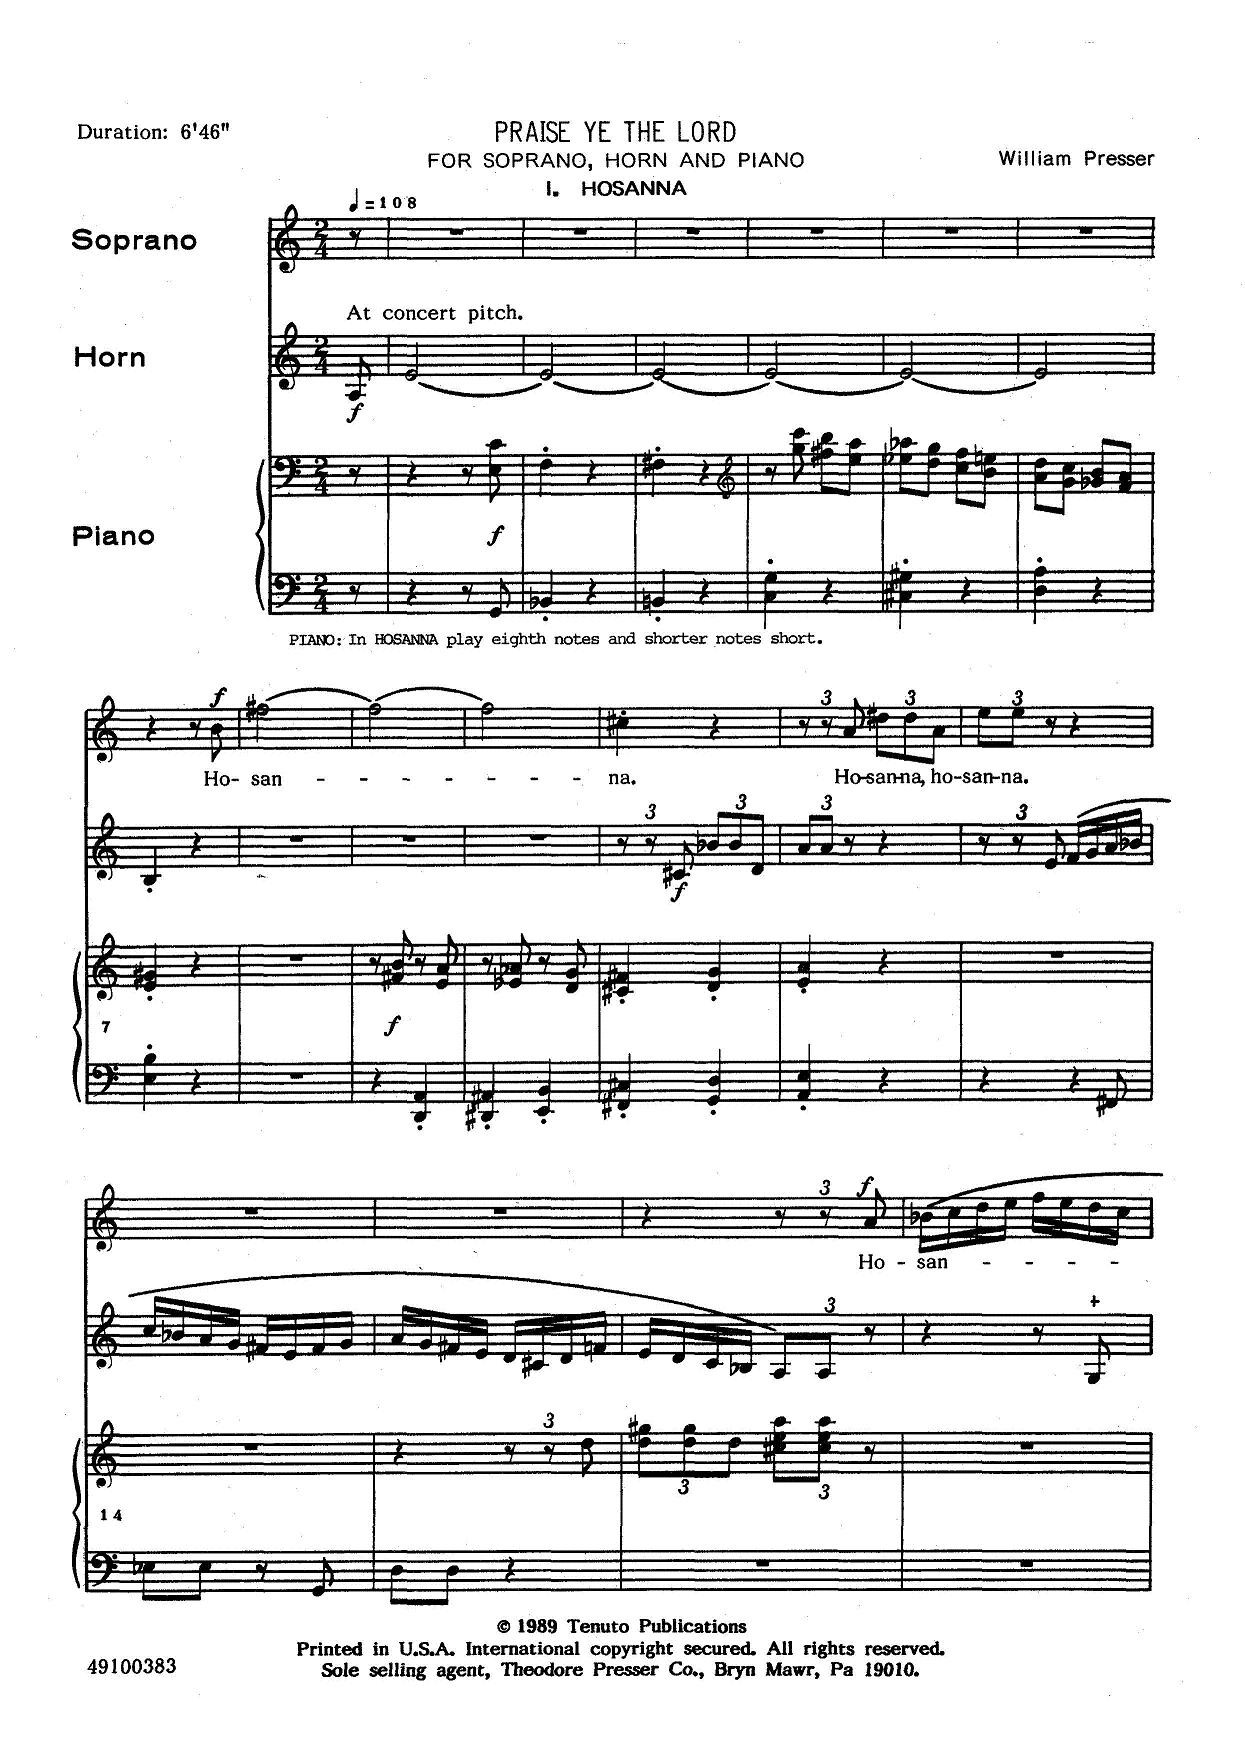 Praise Ye The Lord for Soprano, Horn, and Piano by William Presser